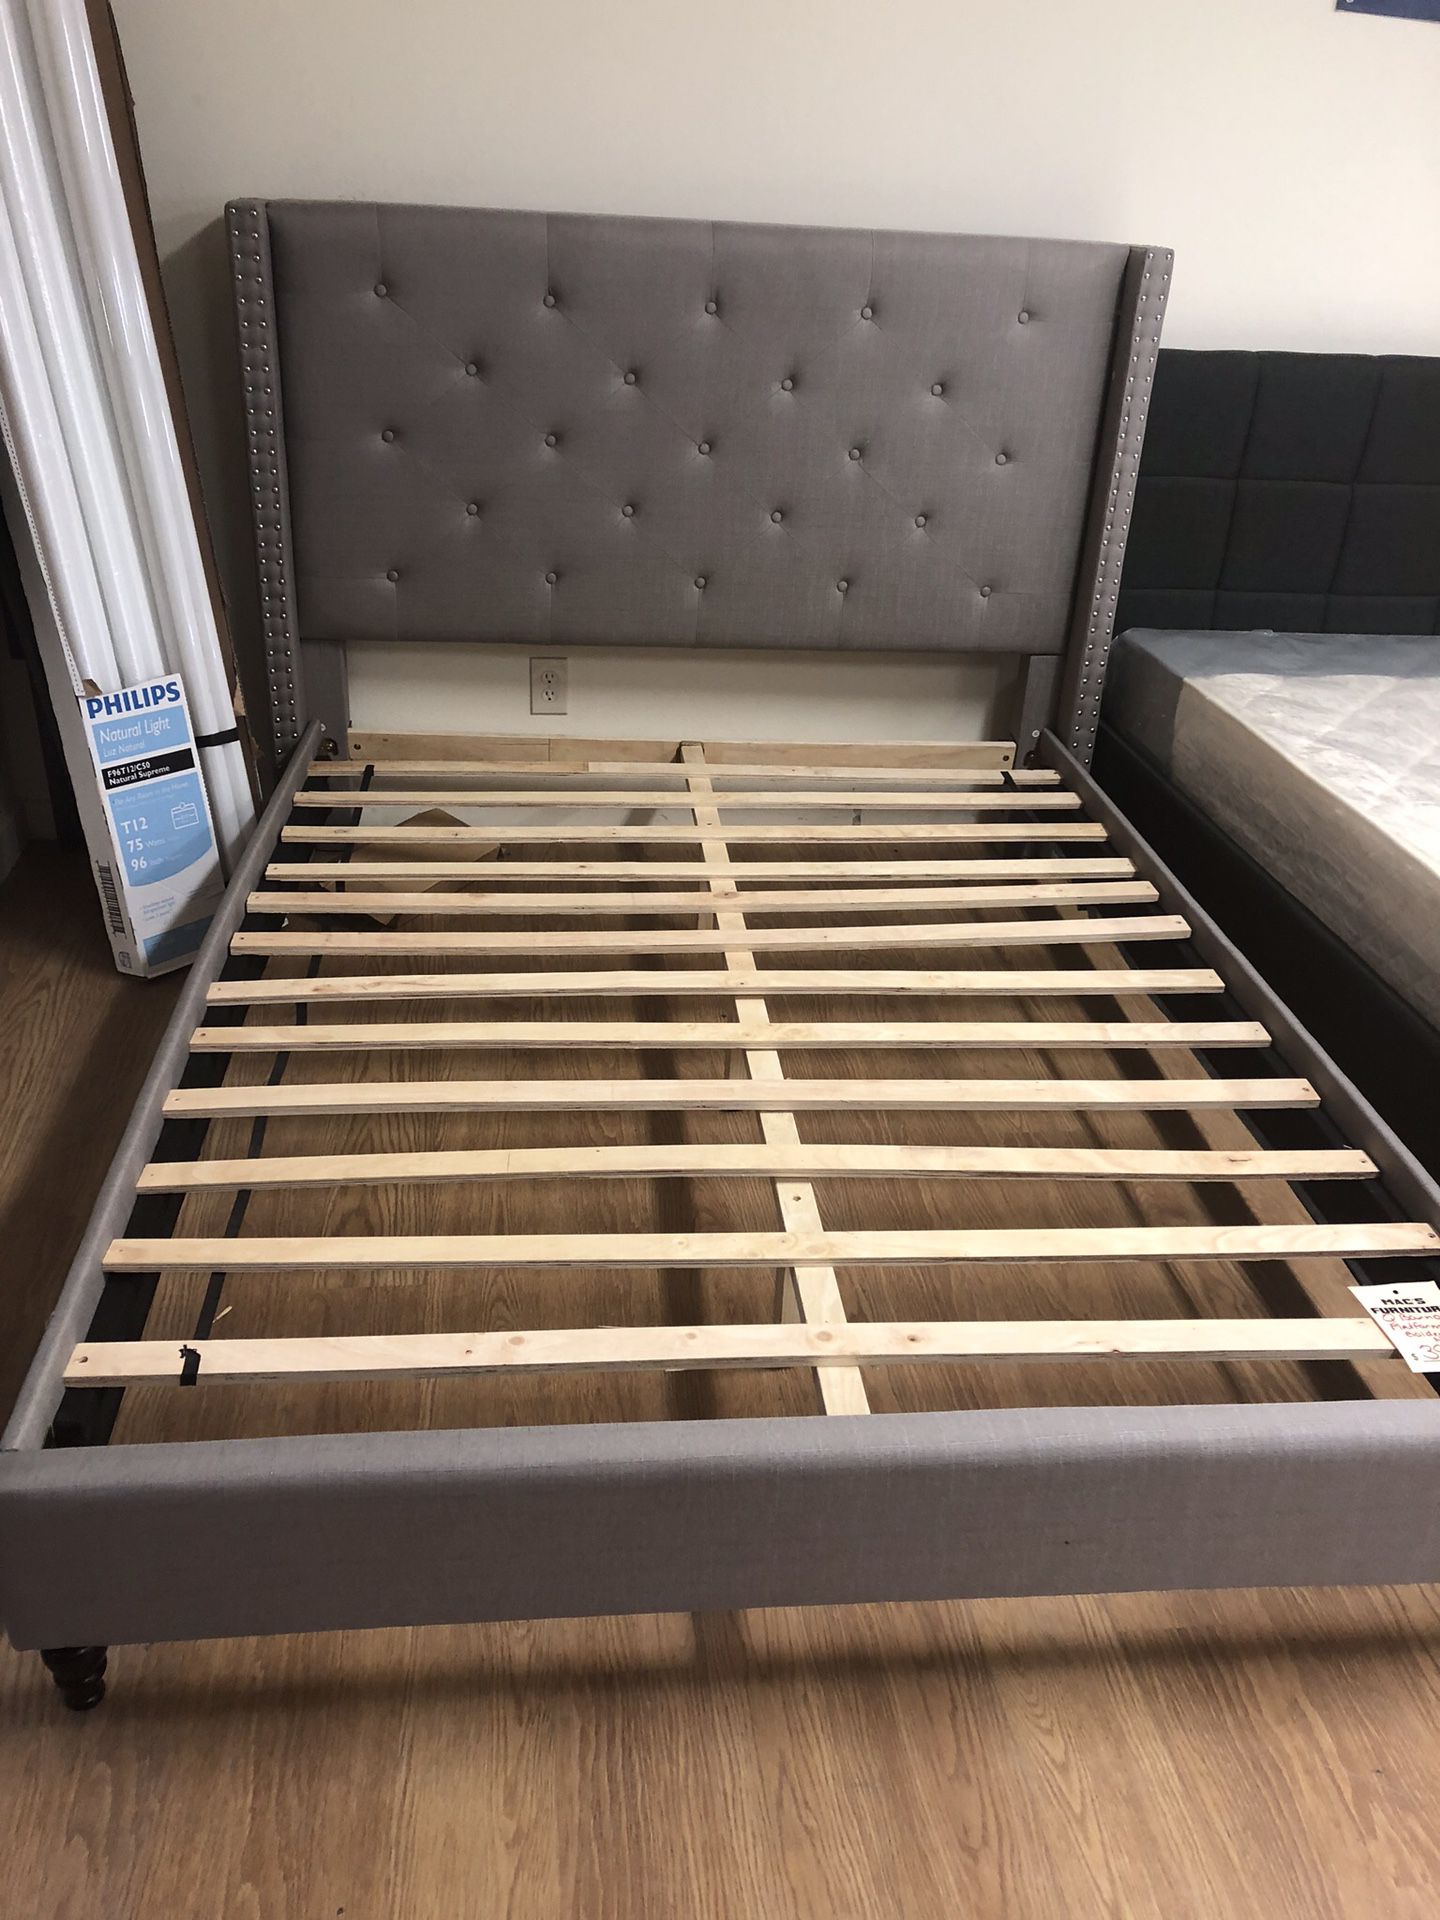 New queen bed frame in box